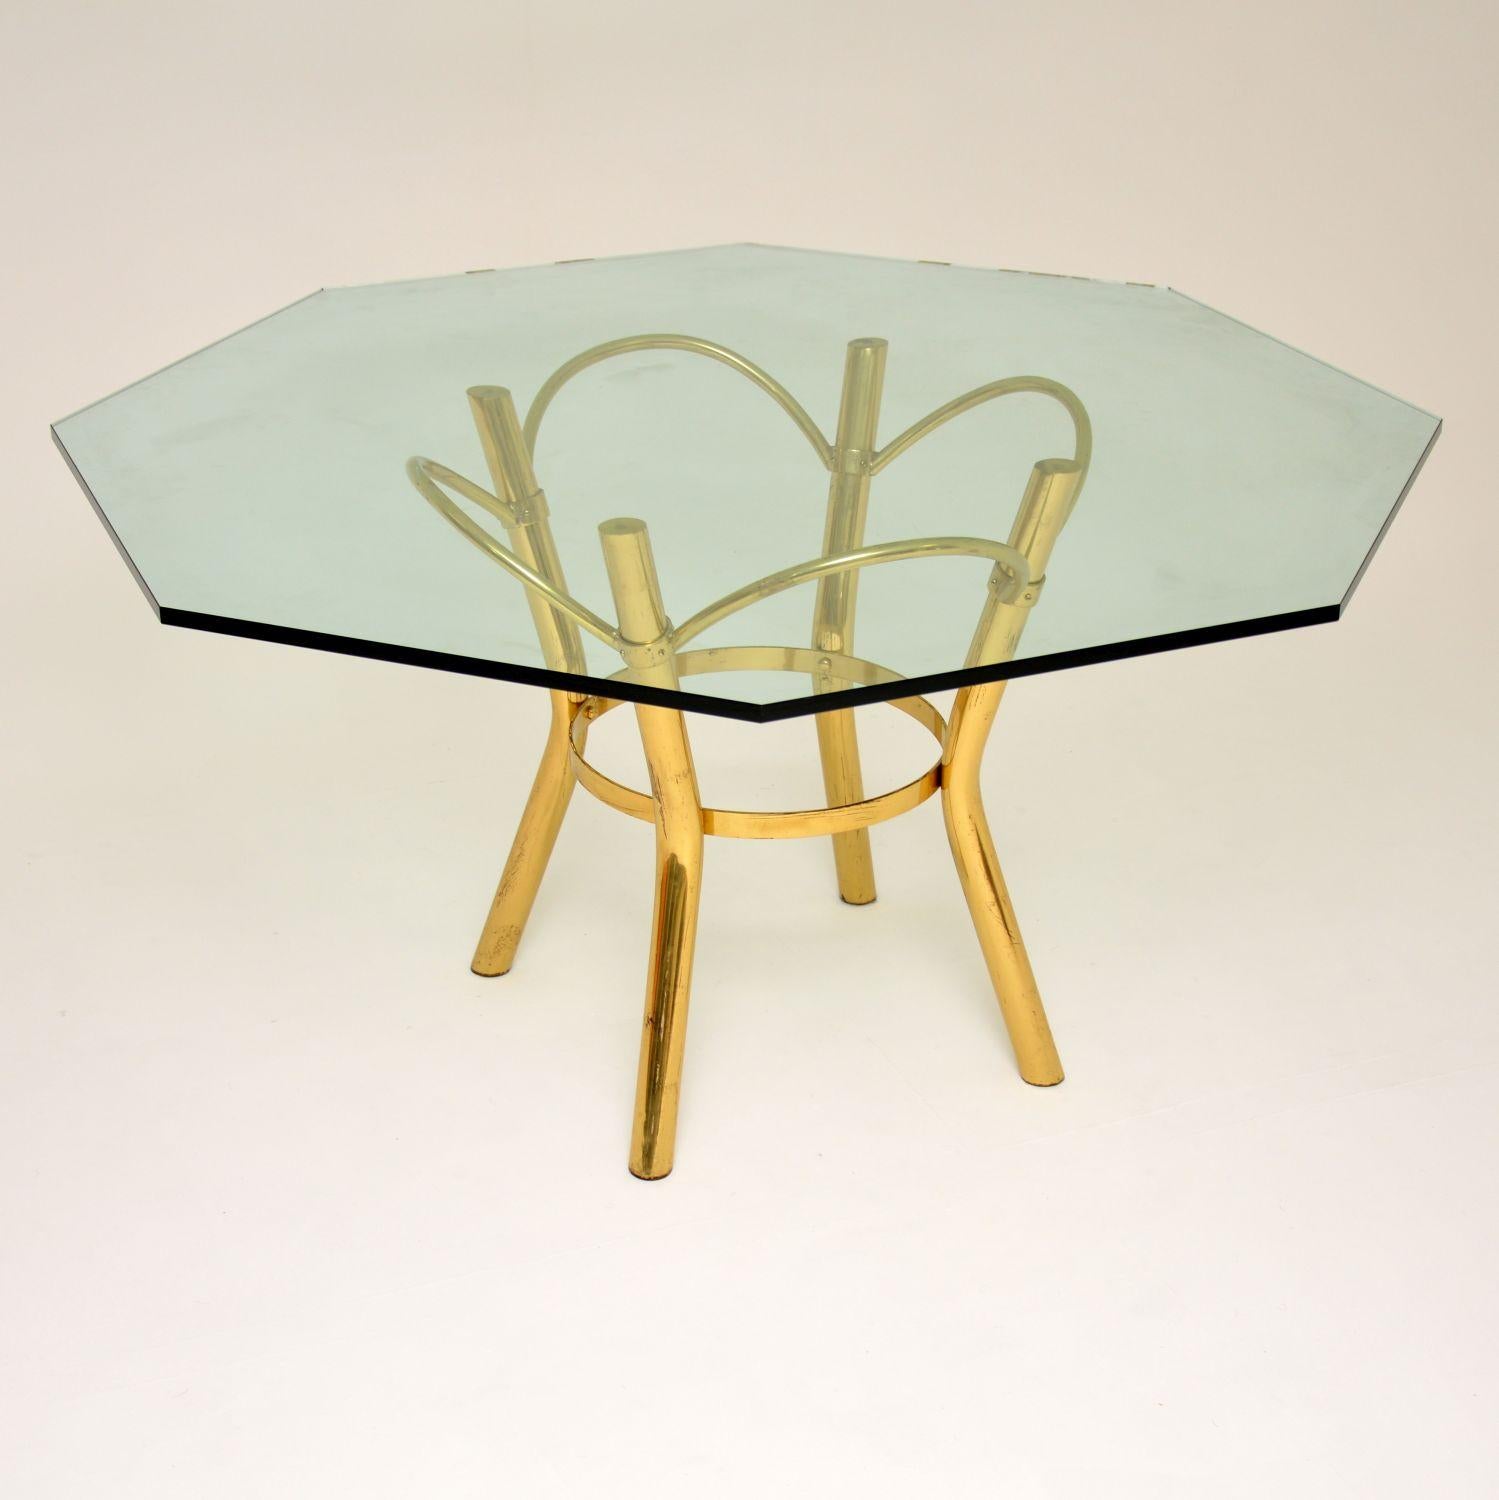 Italian 1970's Vintage Brass & Glass Dining Table For Sale